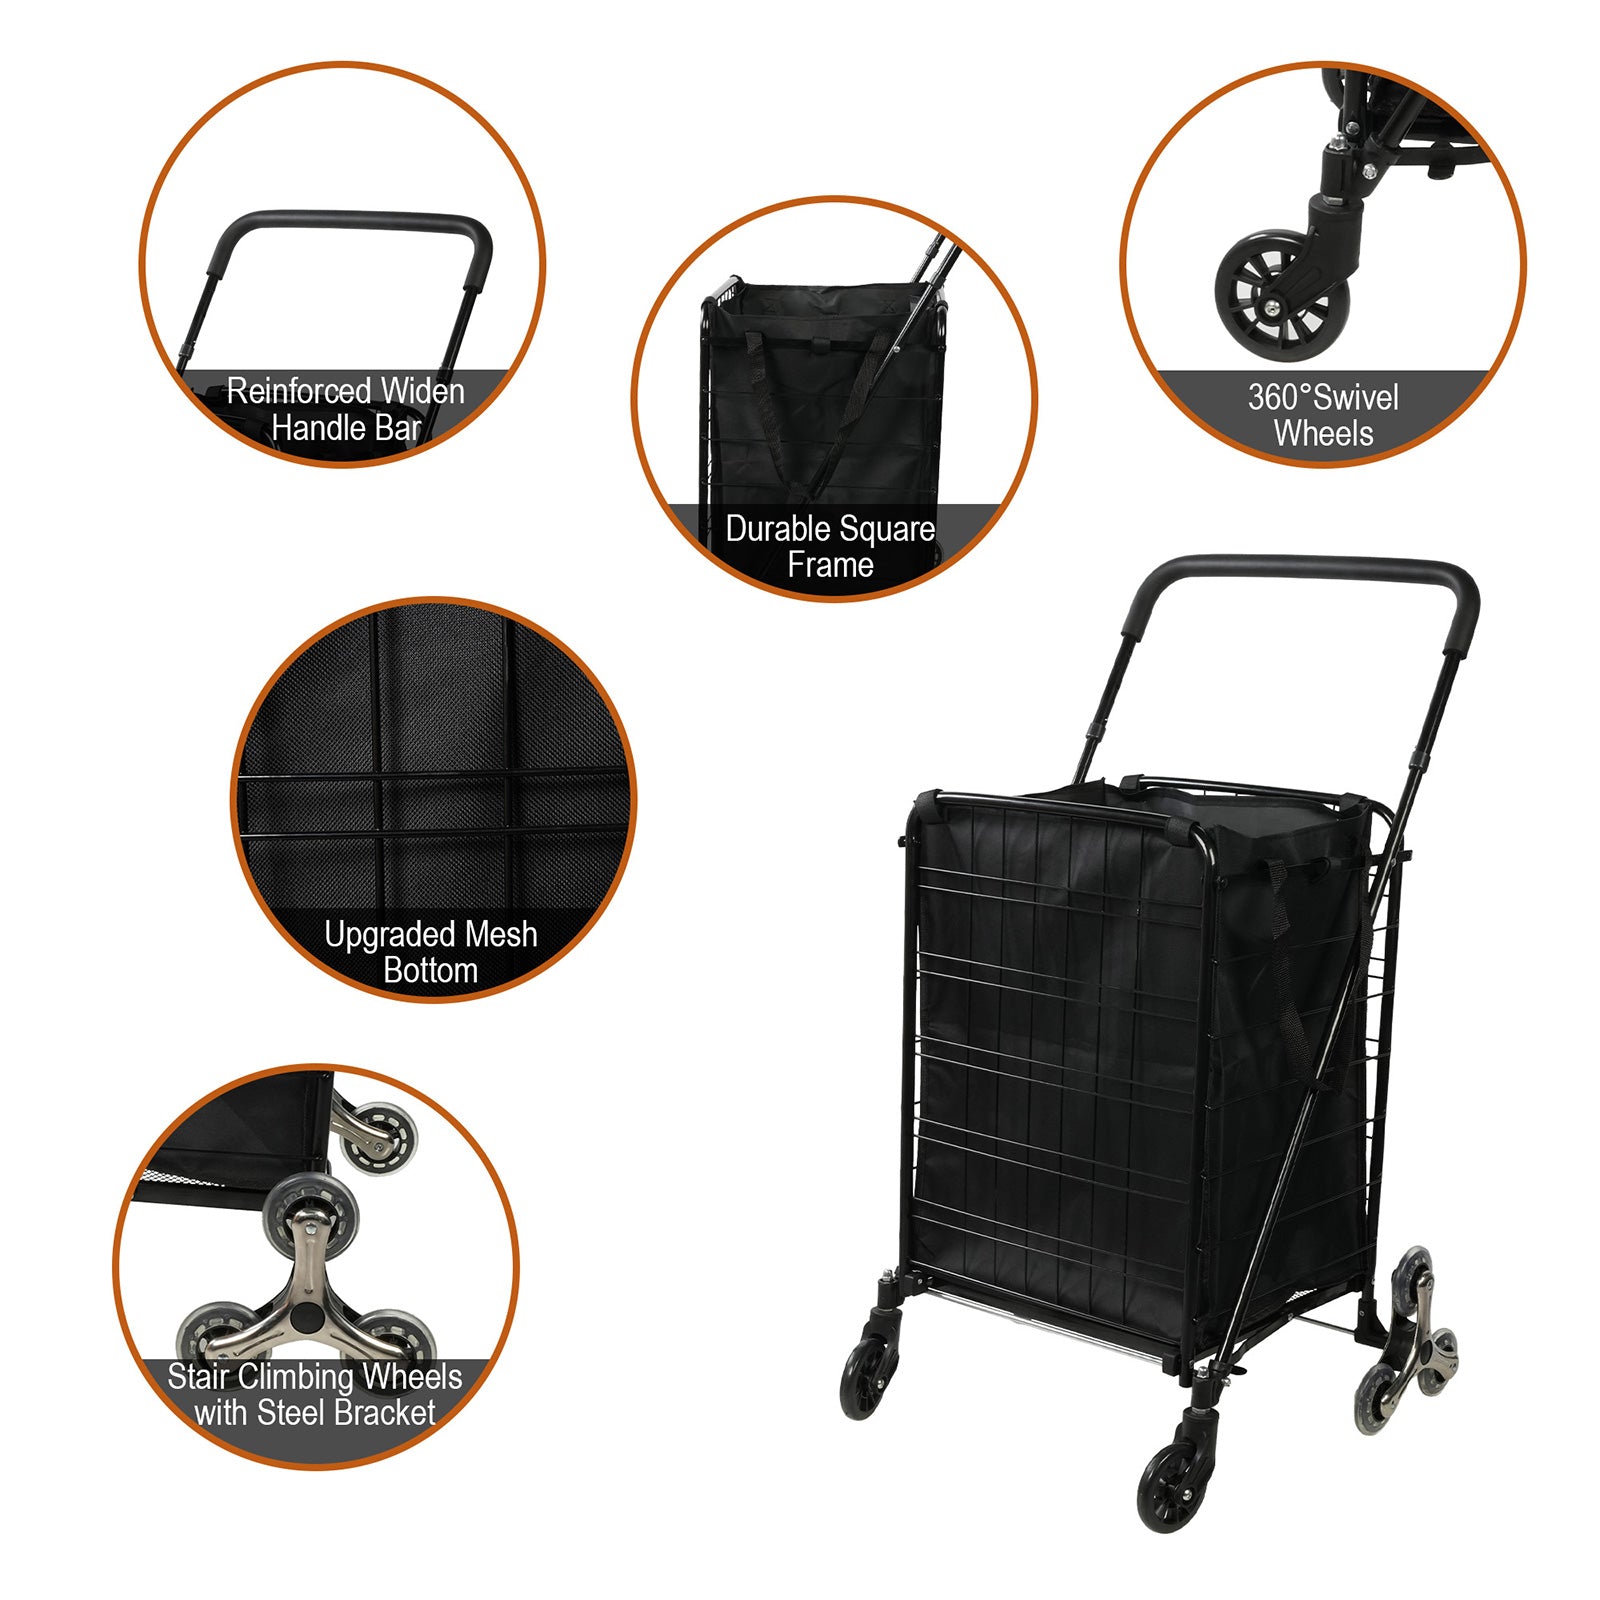 Folding Shopping Cart with Wheels and Removable Cloth Liner Holds Up to 77 Lbs.